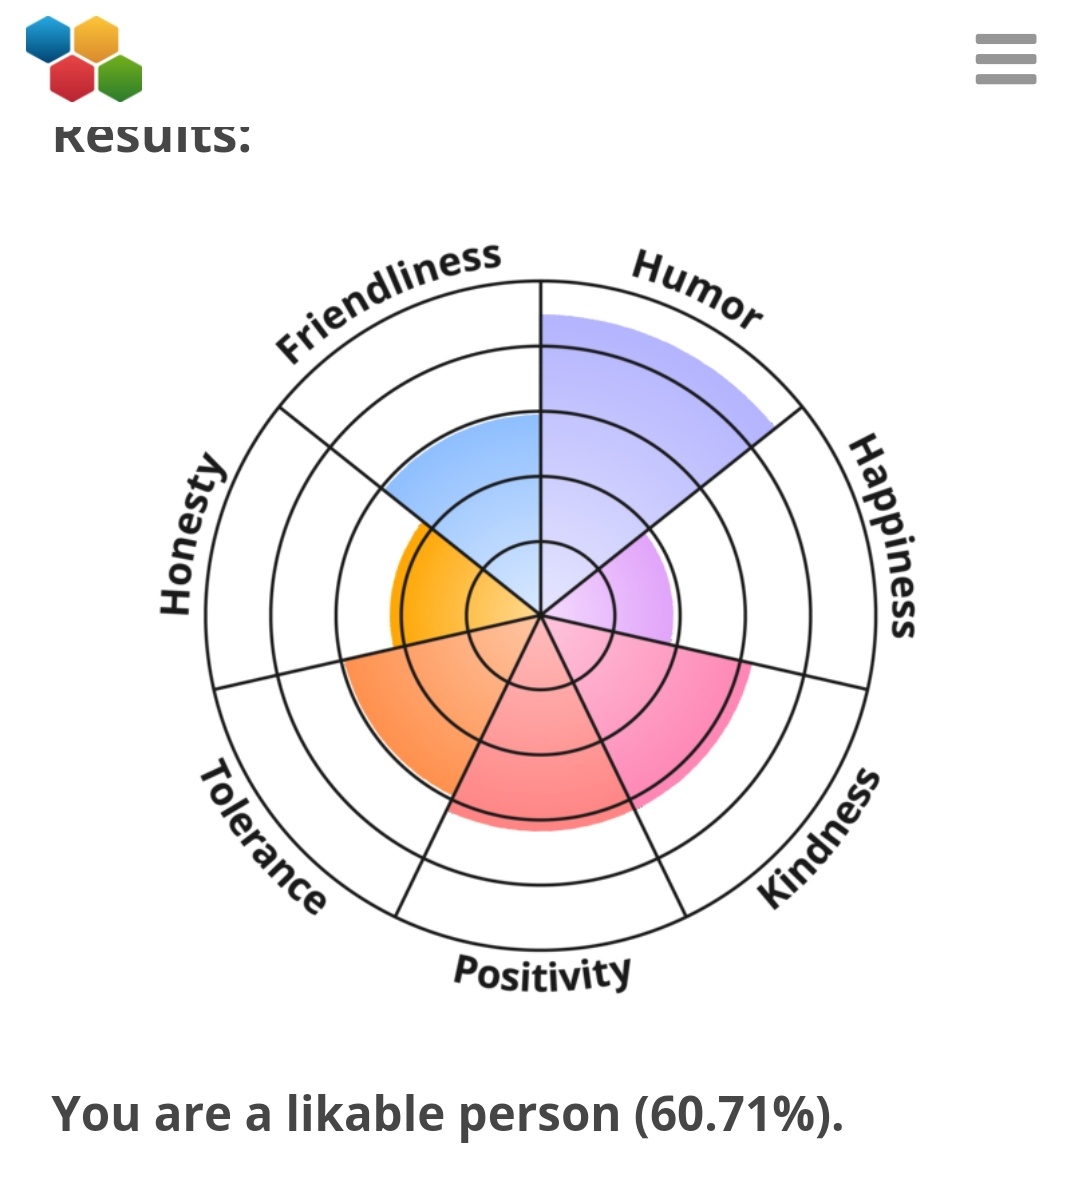 Likeable person test на русском